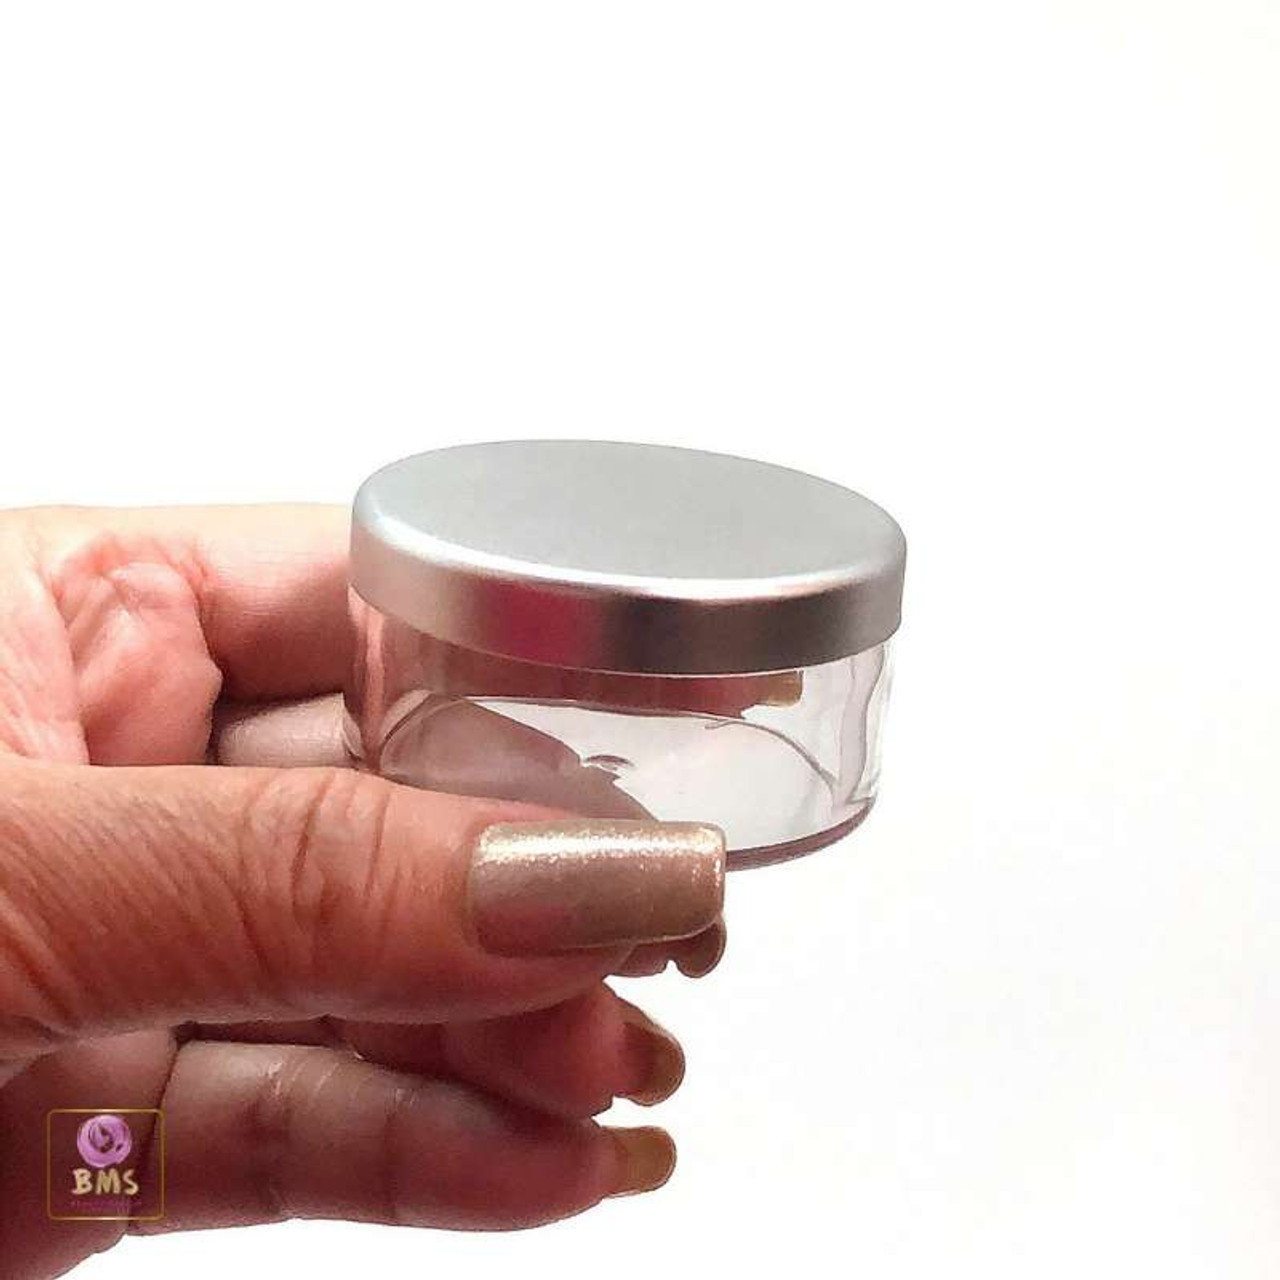 24PCScosmetic containers cosmetic jars cosmetics sub container Portable eye